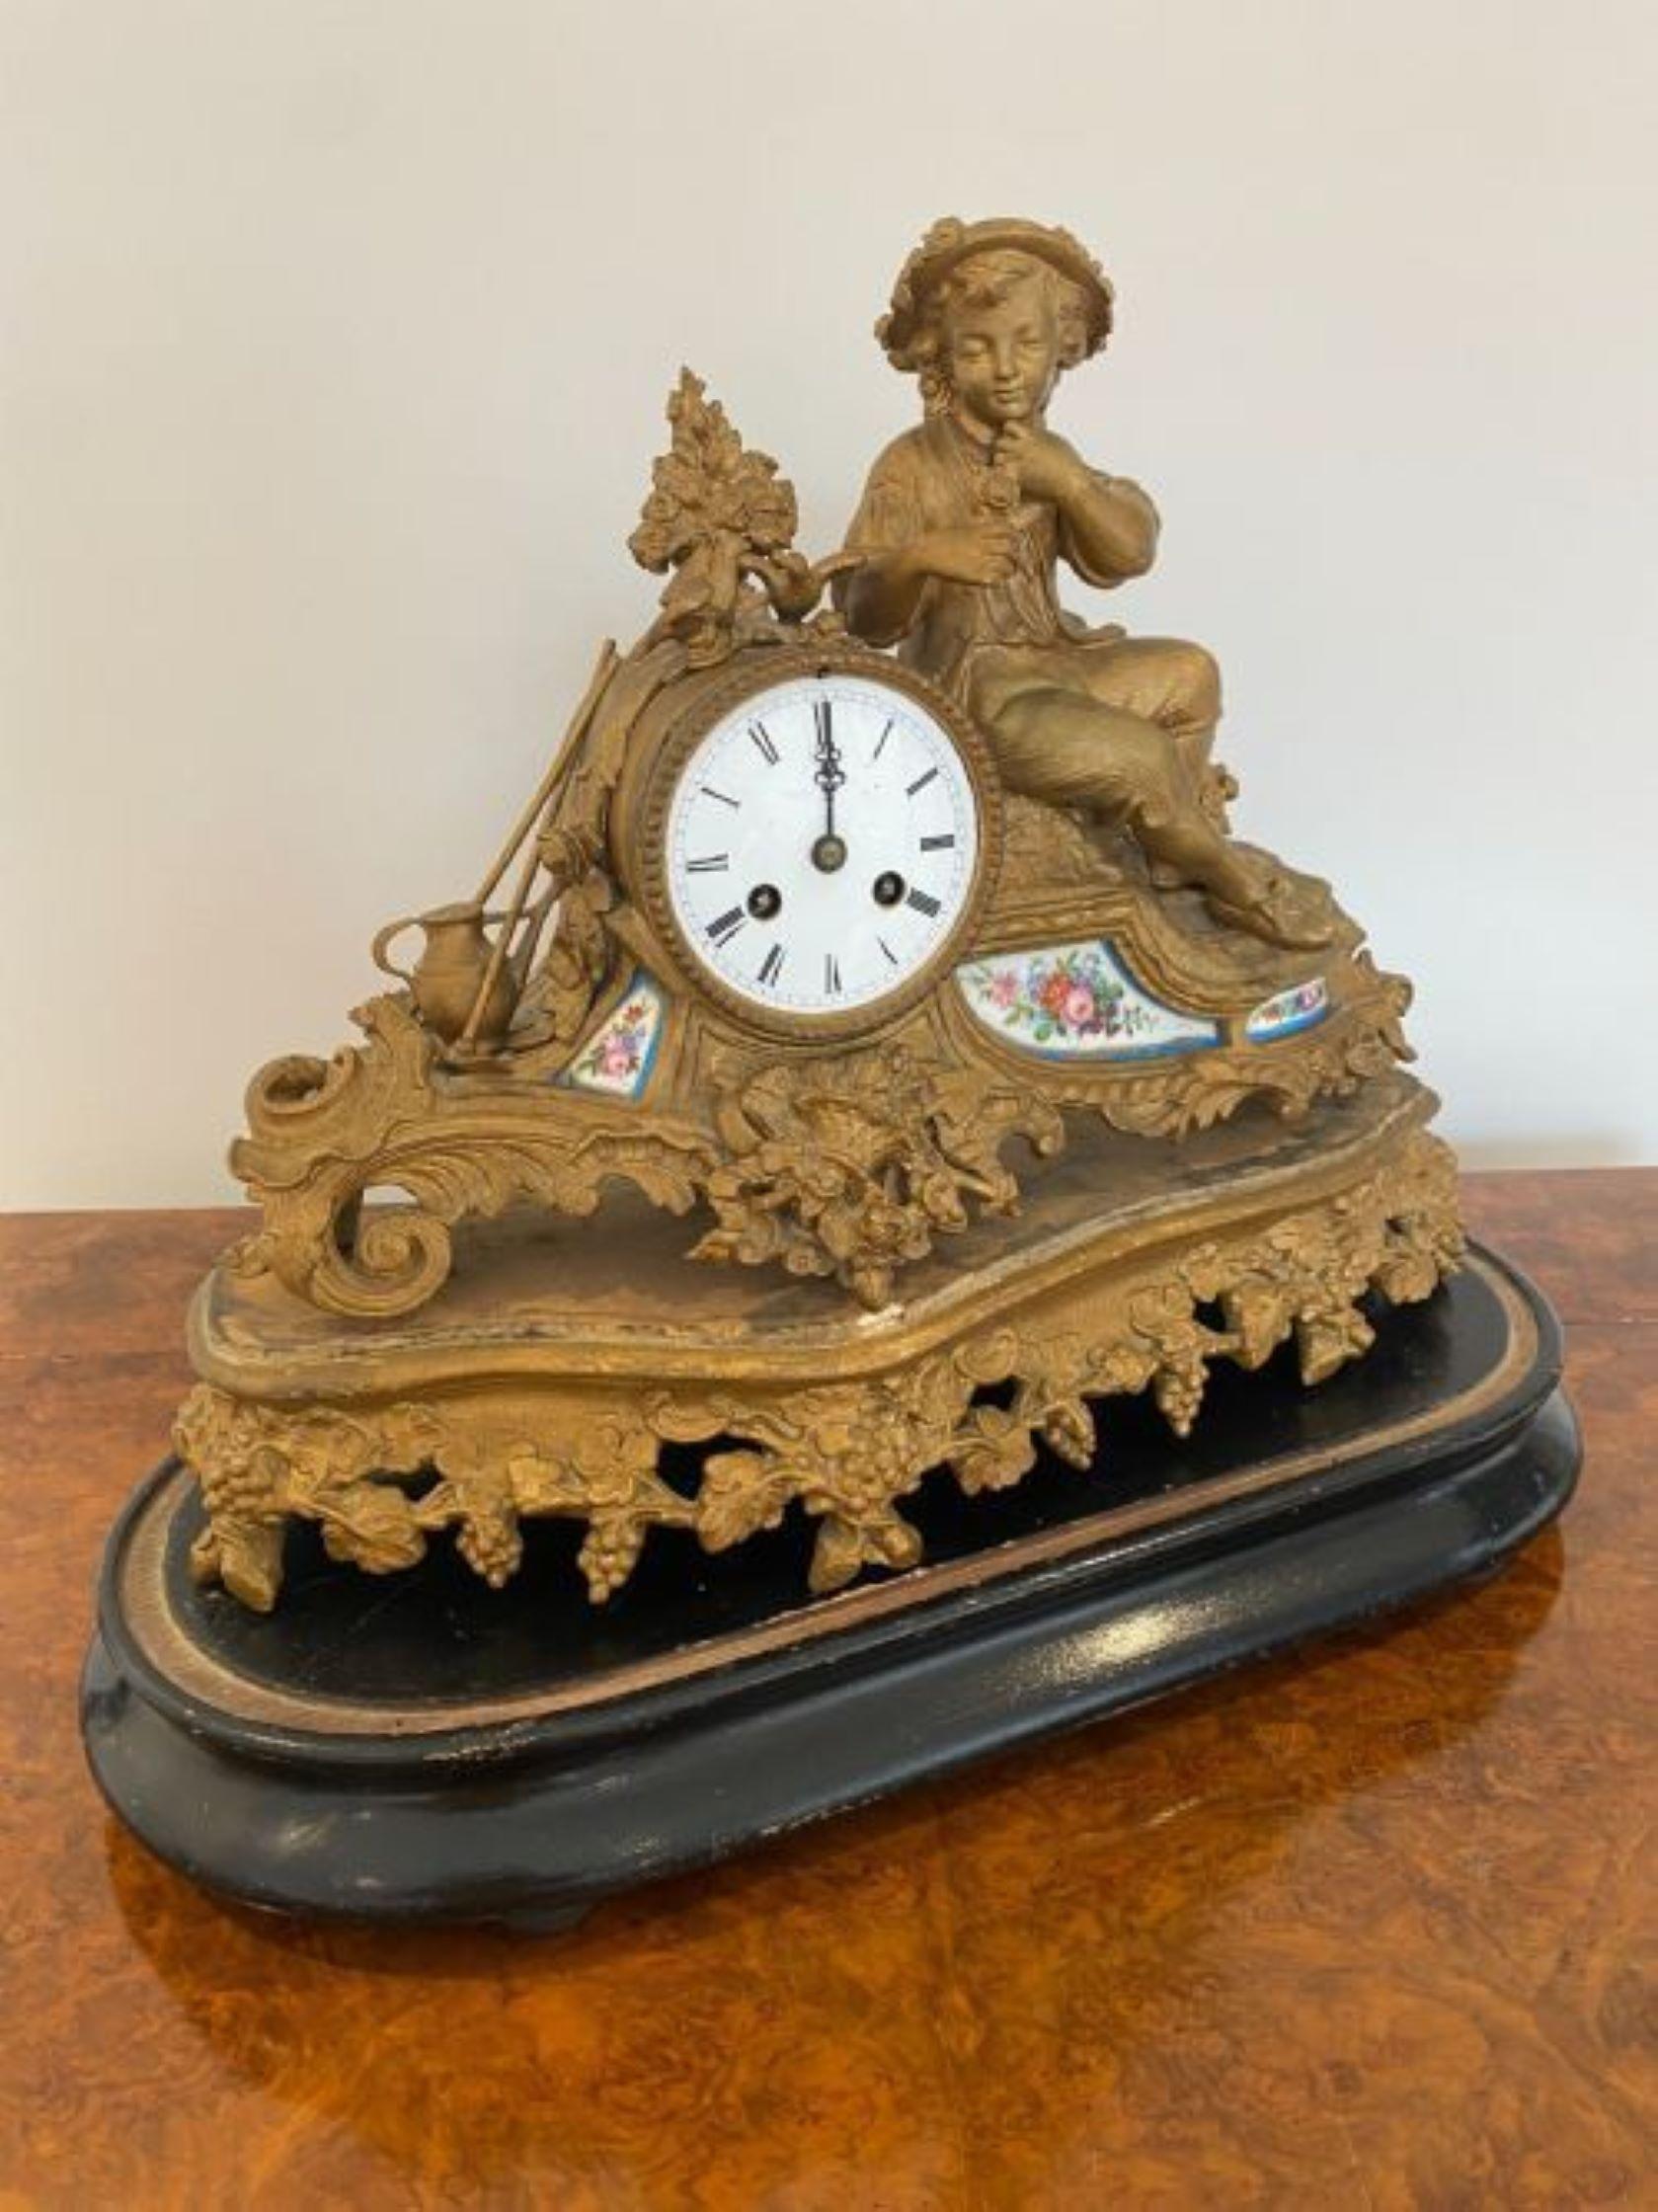 Quality 19th century French Louis XVI ormolu and porcelain mantel clock, the case cast as a seated farm boy with floral rimmed hat, holding a single rose, by a pair of Doves, rake, pick and watering can, white enamel dial, bold Roman numerals, eight